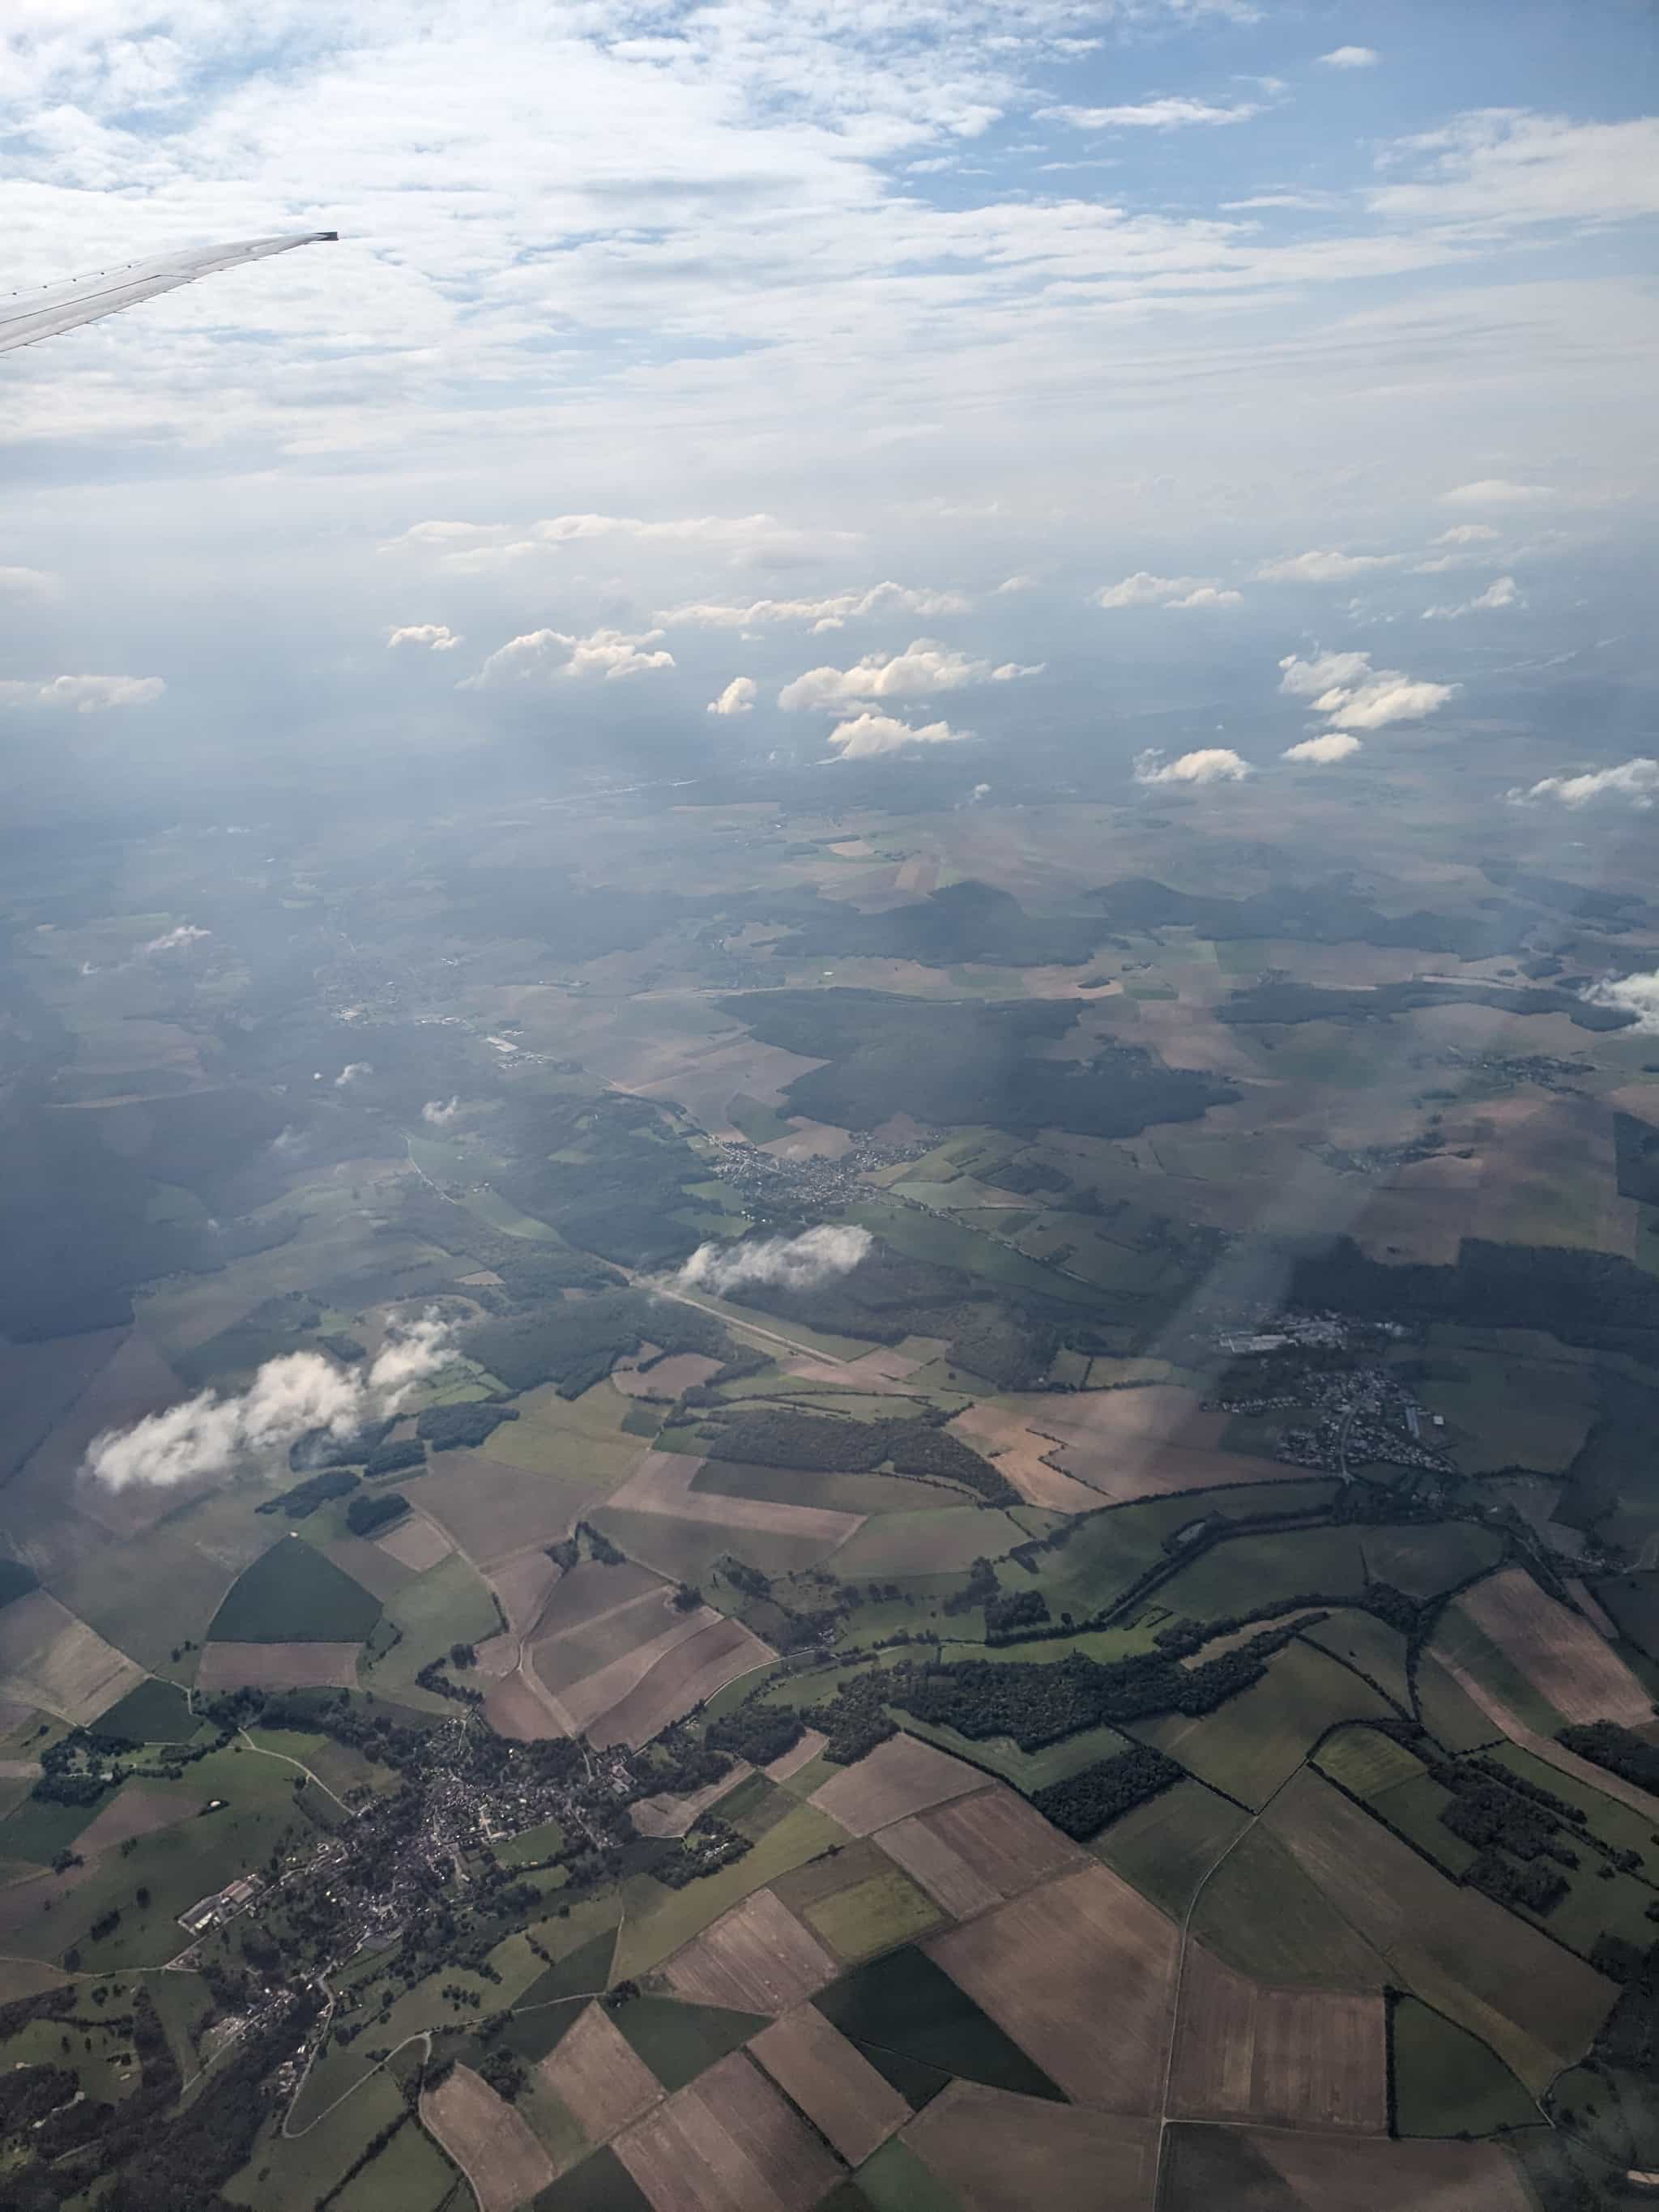 Looking down on small clouds and farmland. A plane wingtip is visible in the corner of the picture.